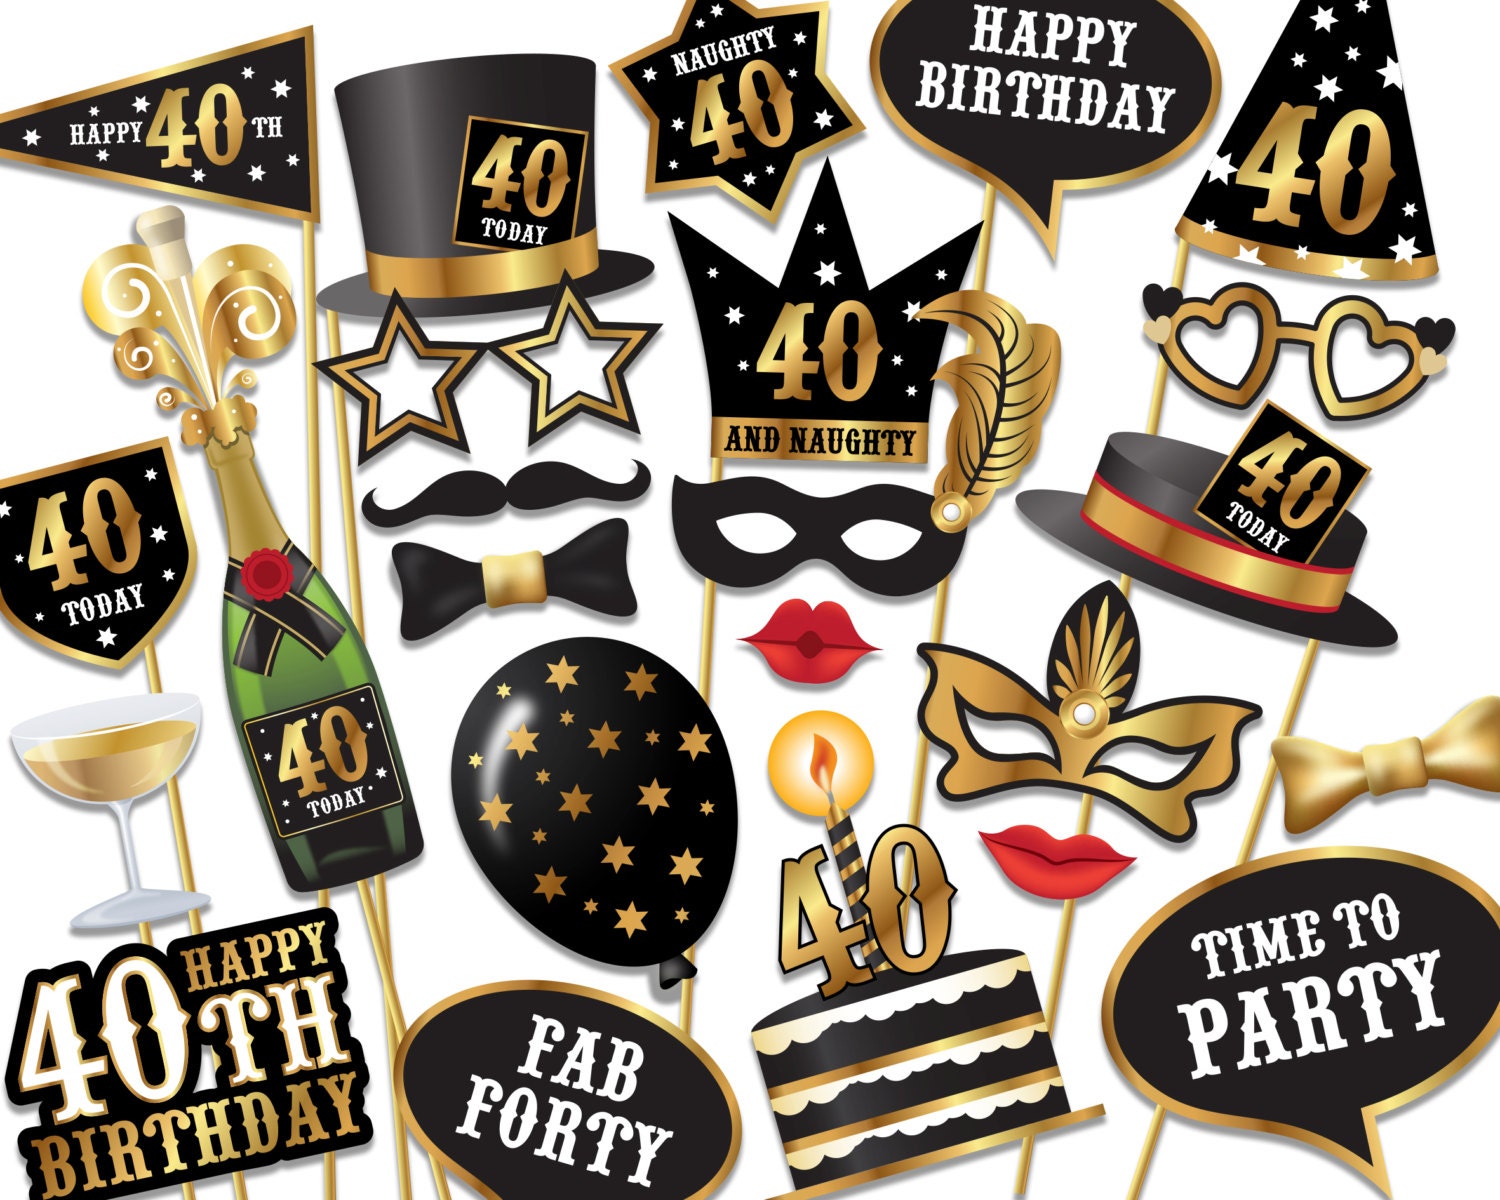 40th-birthday-photo-booth-props-instant-download-printable